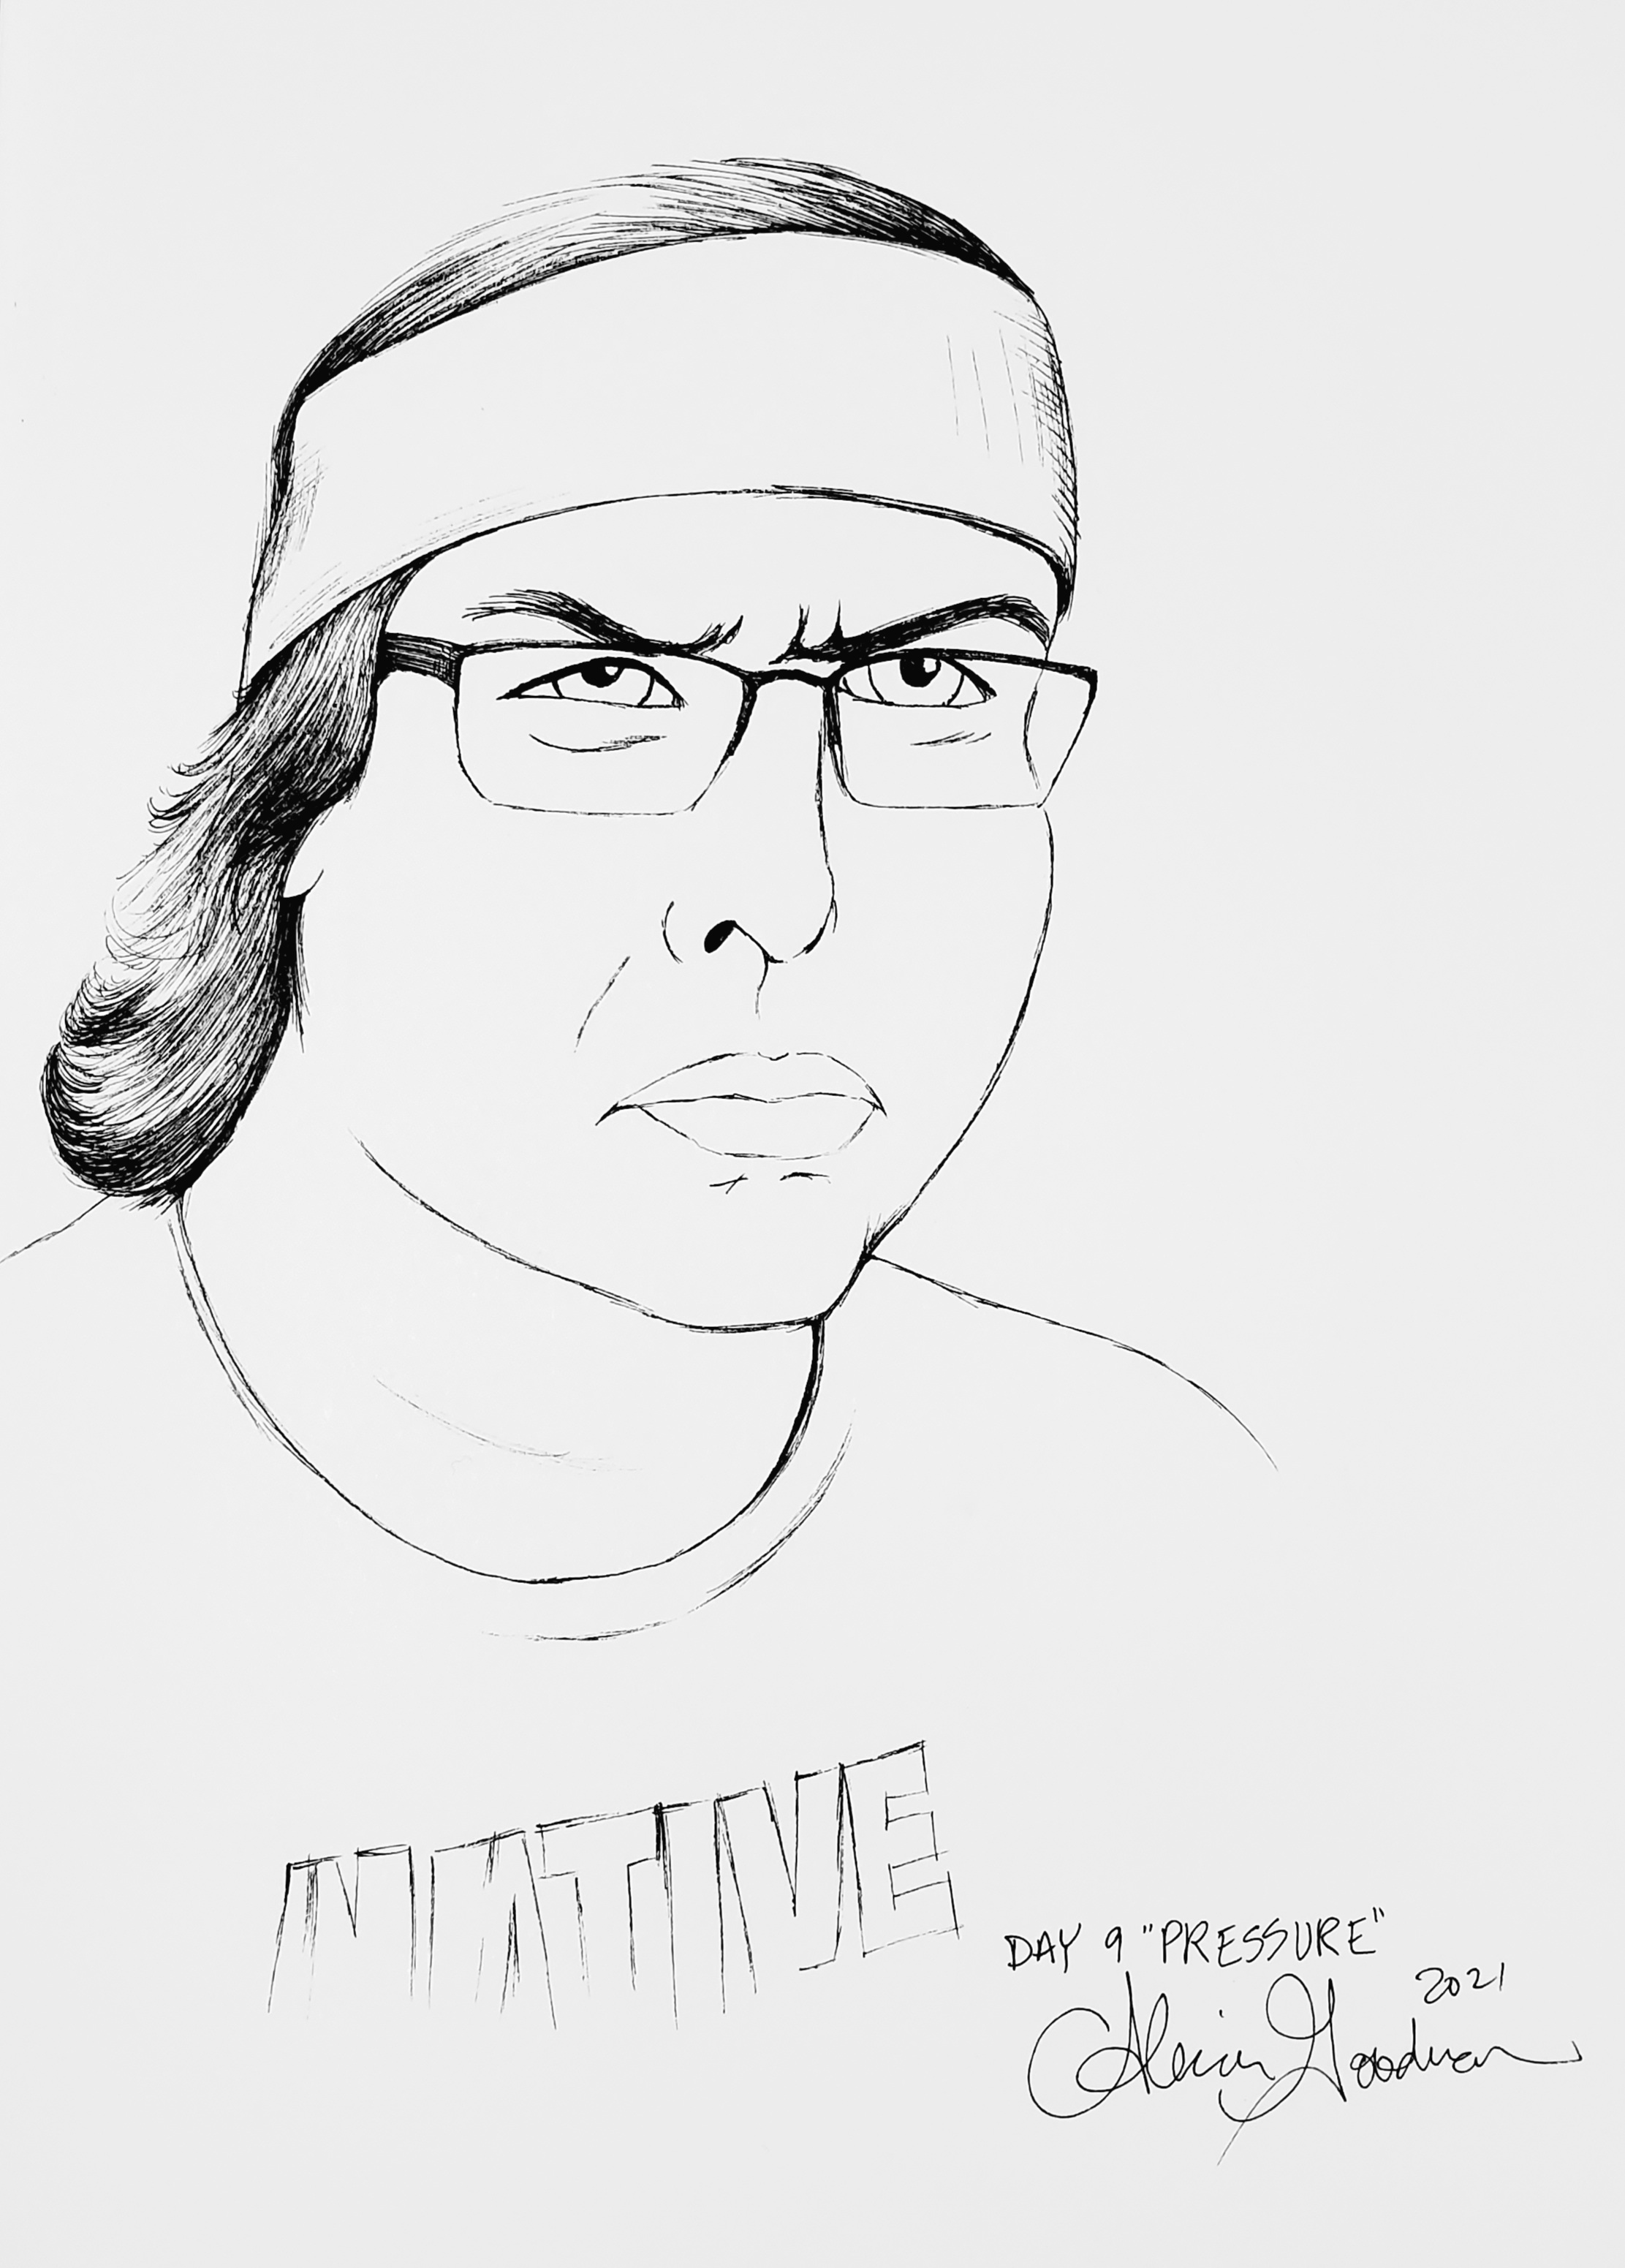 Inktober Day nine Pressure ink drawing of glaring American Indian guy with headband and glasses by Alecia Goodman copyright 2021 to present goodman to present